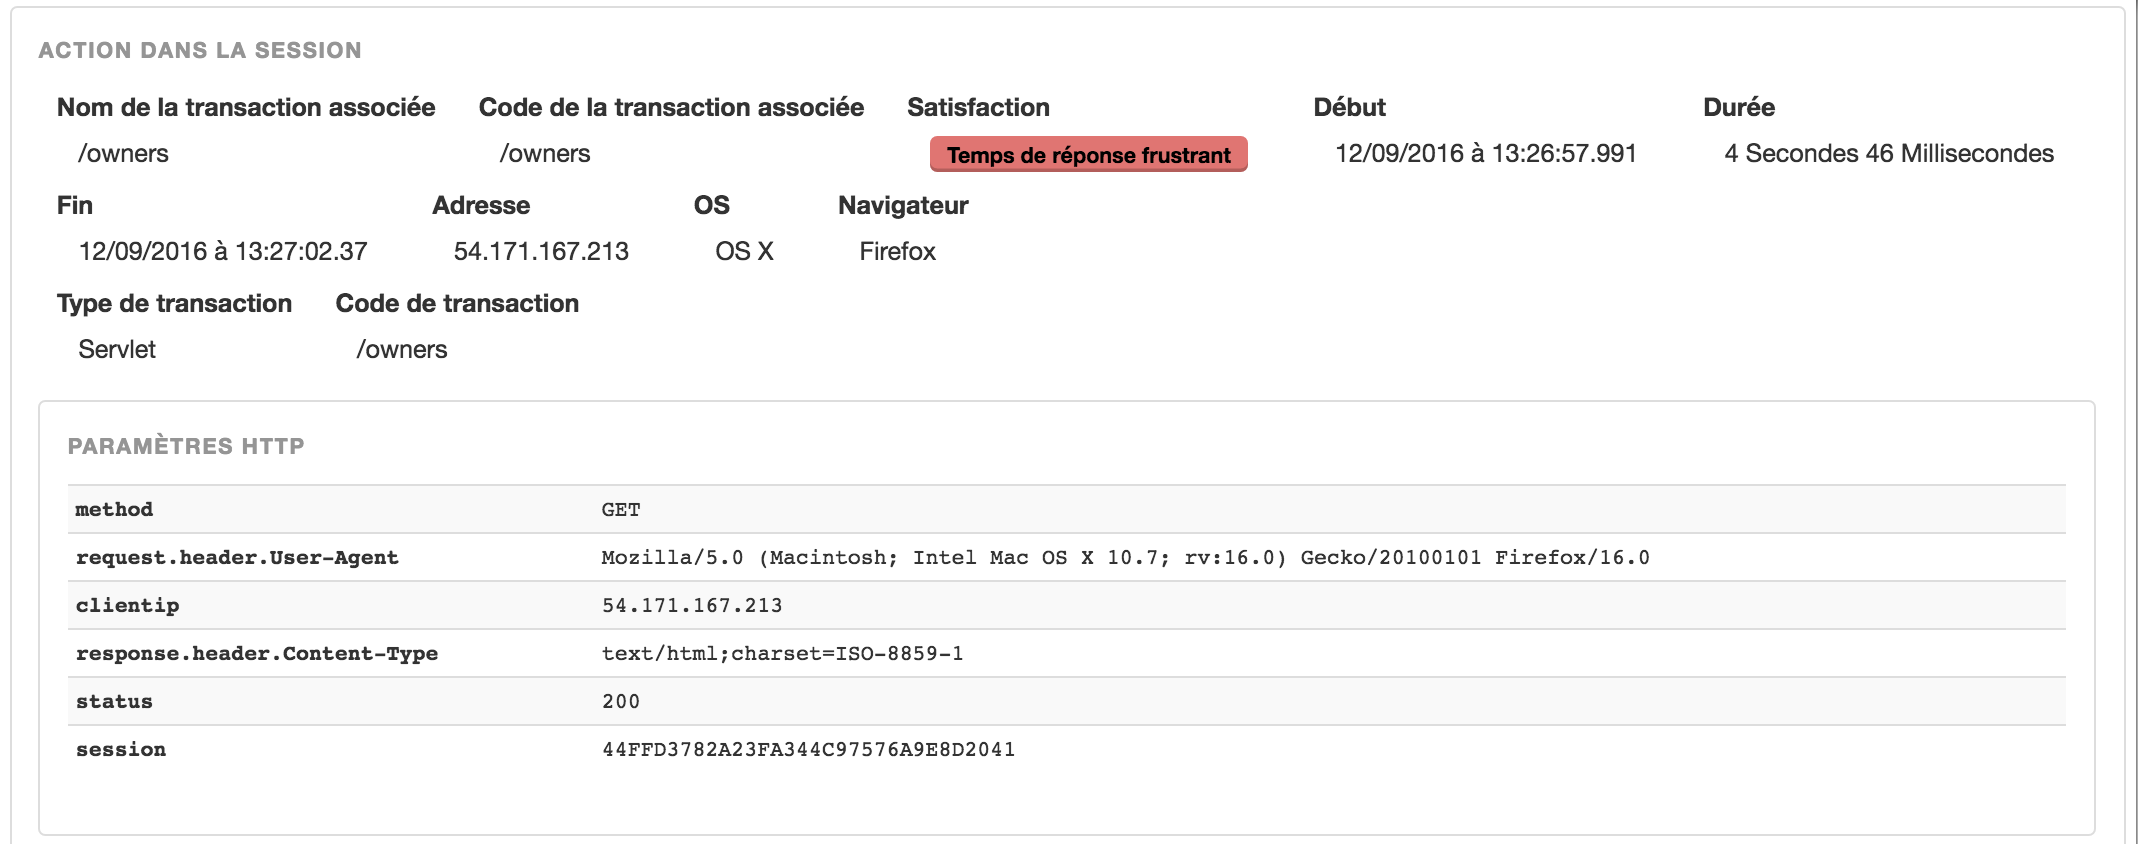 Transaction details with HTTP headers